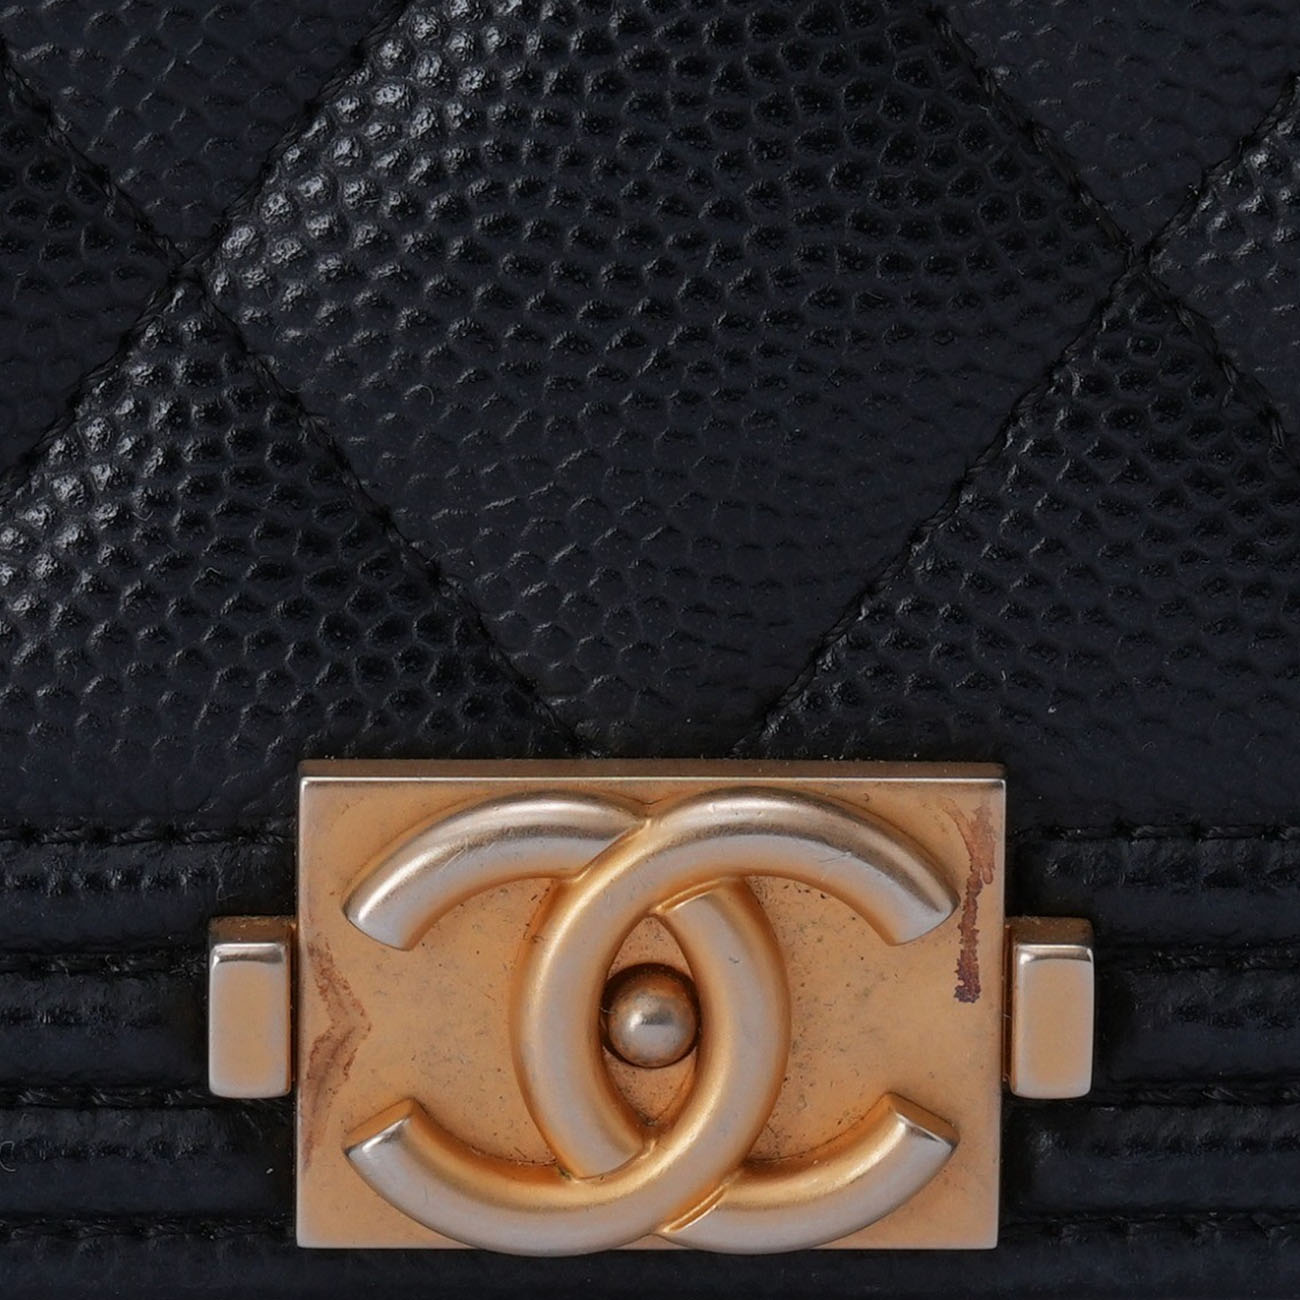 CHANEL(USED)샤넬 캐비어 보이샤넬 WOC